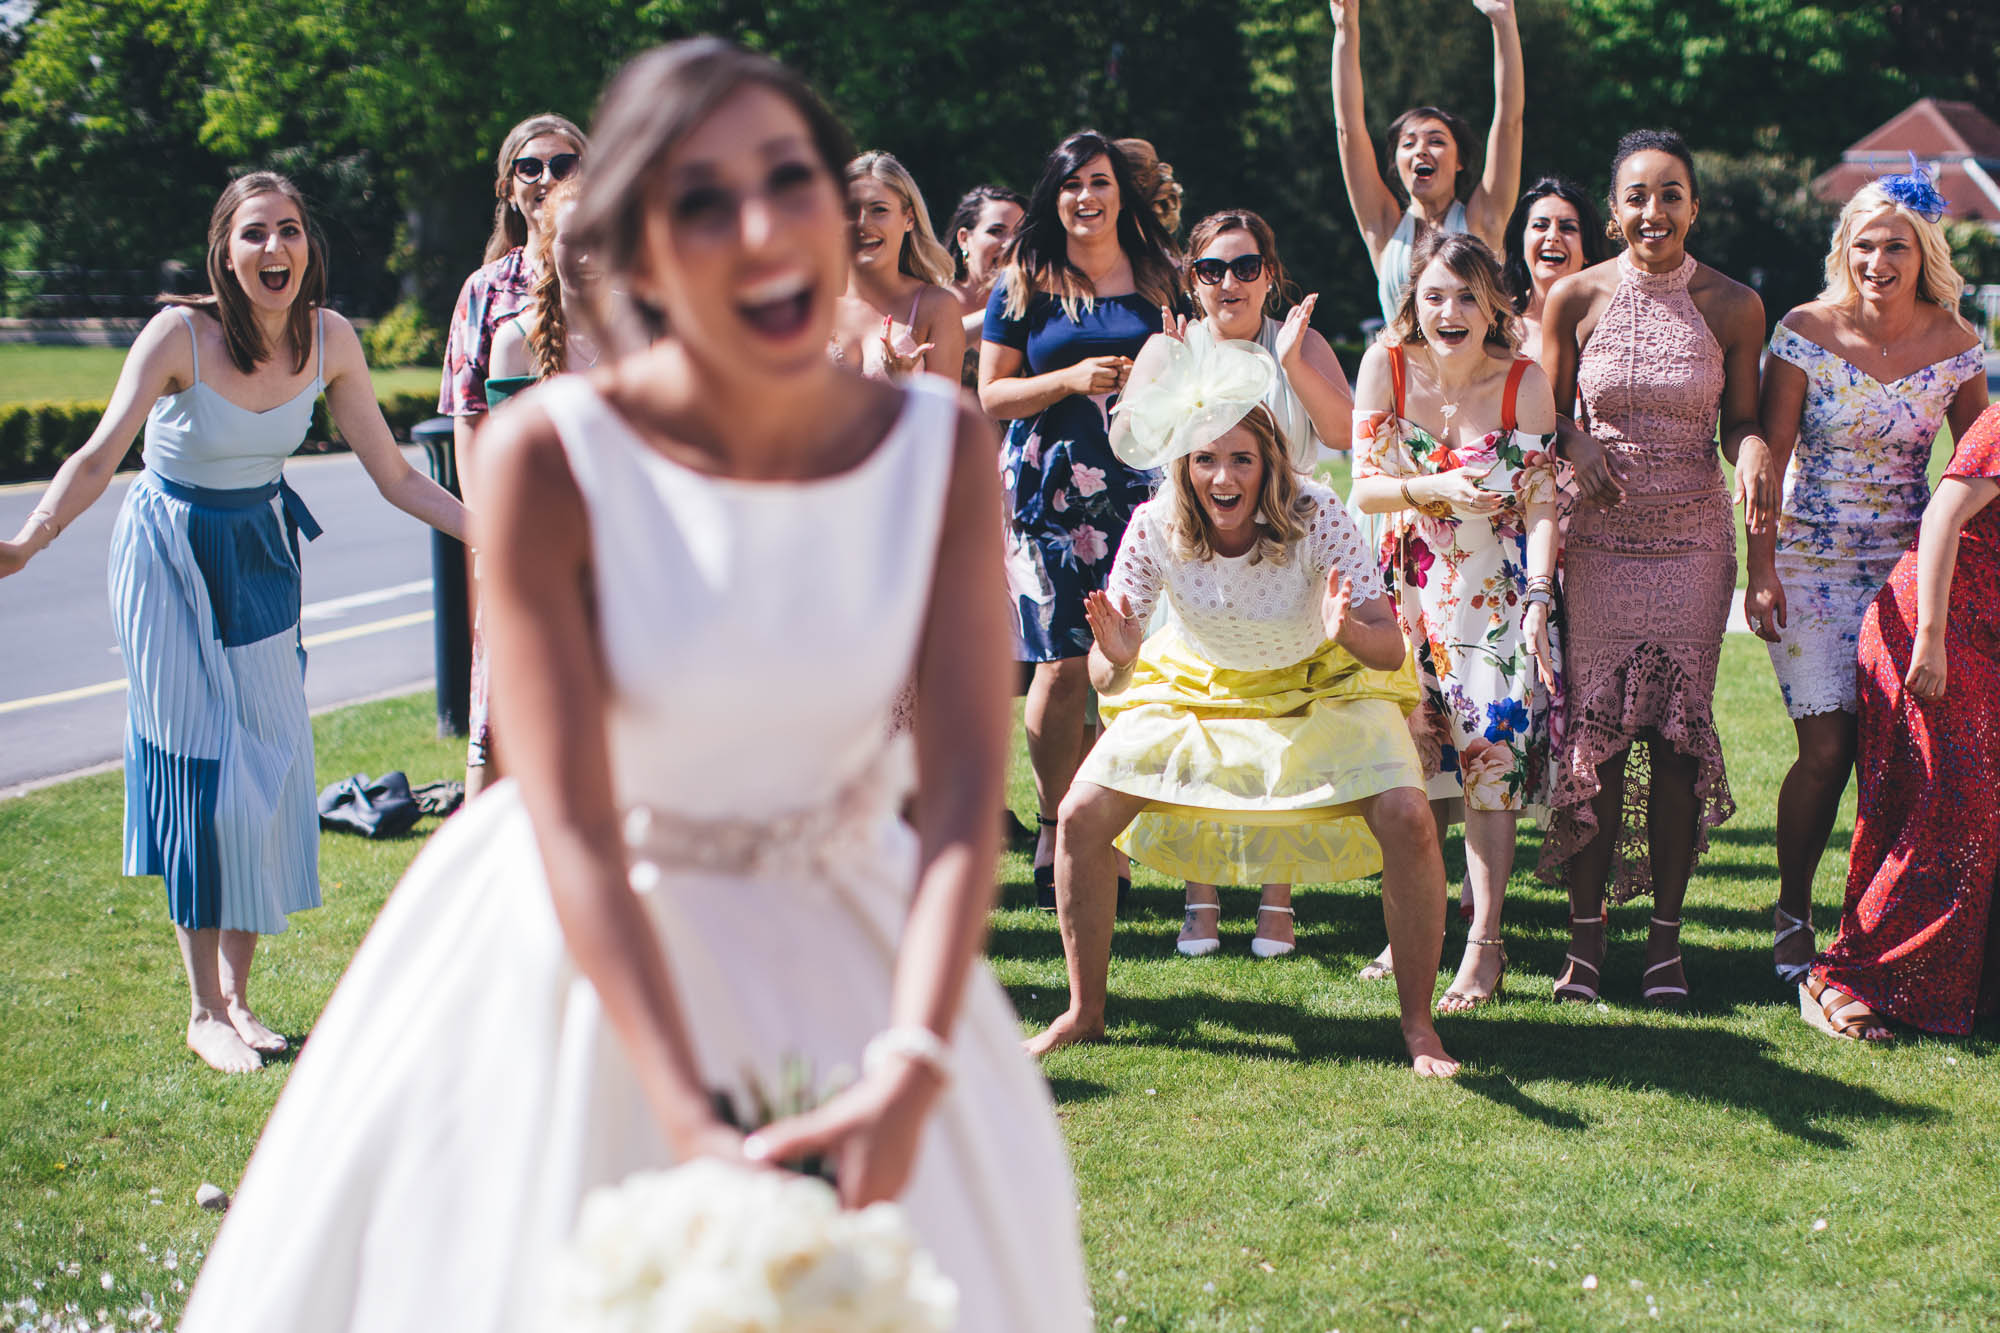 Bride prepares to throw flowers as wedding guests prepares to catch the wedding bouquet